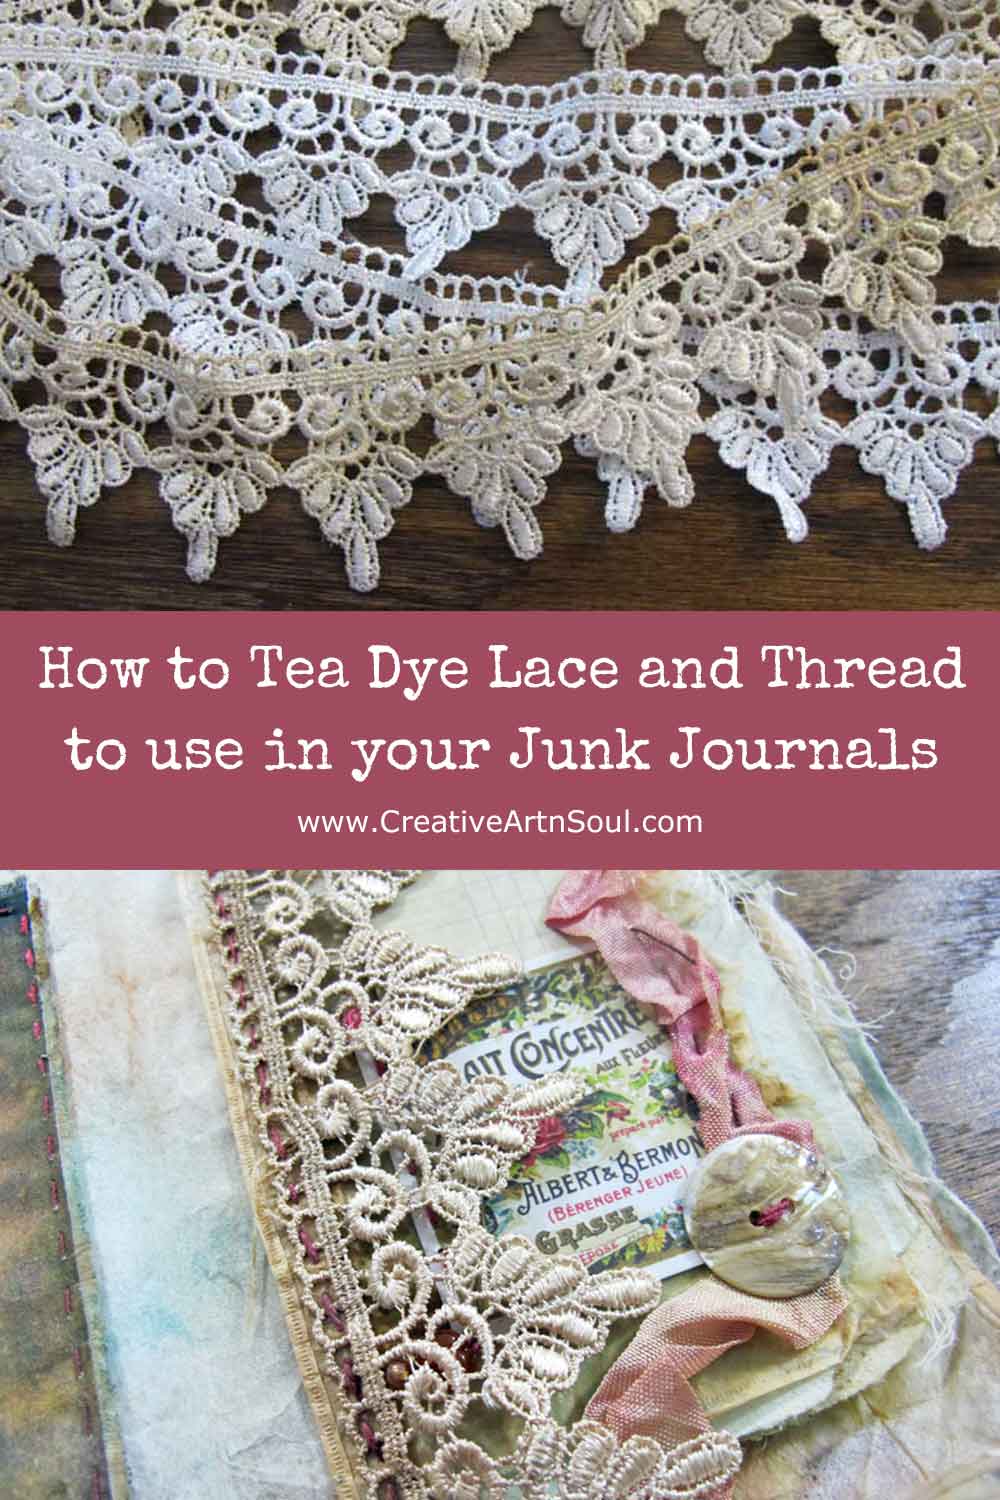 How to Make Beautiful Tea Dyed Lace and Embroidery Thread to use in your Junk Journals